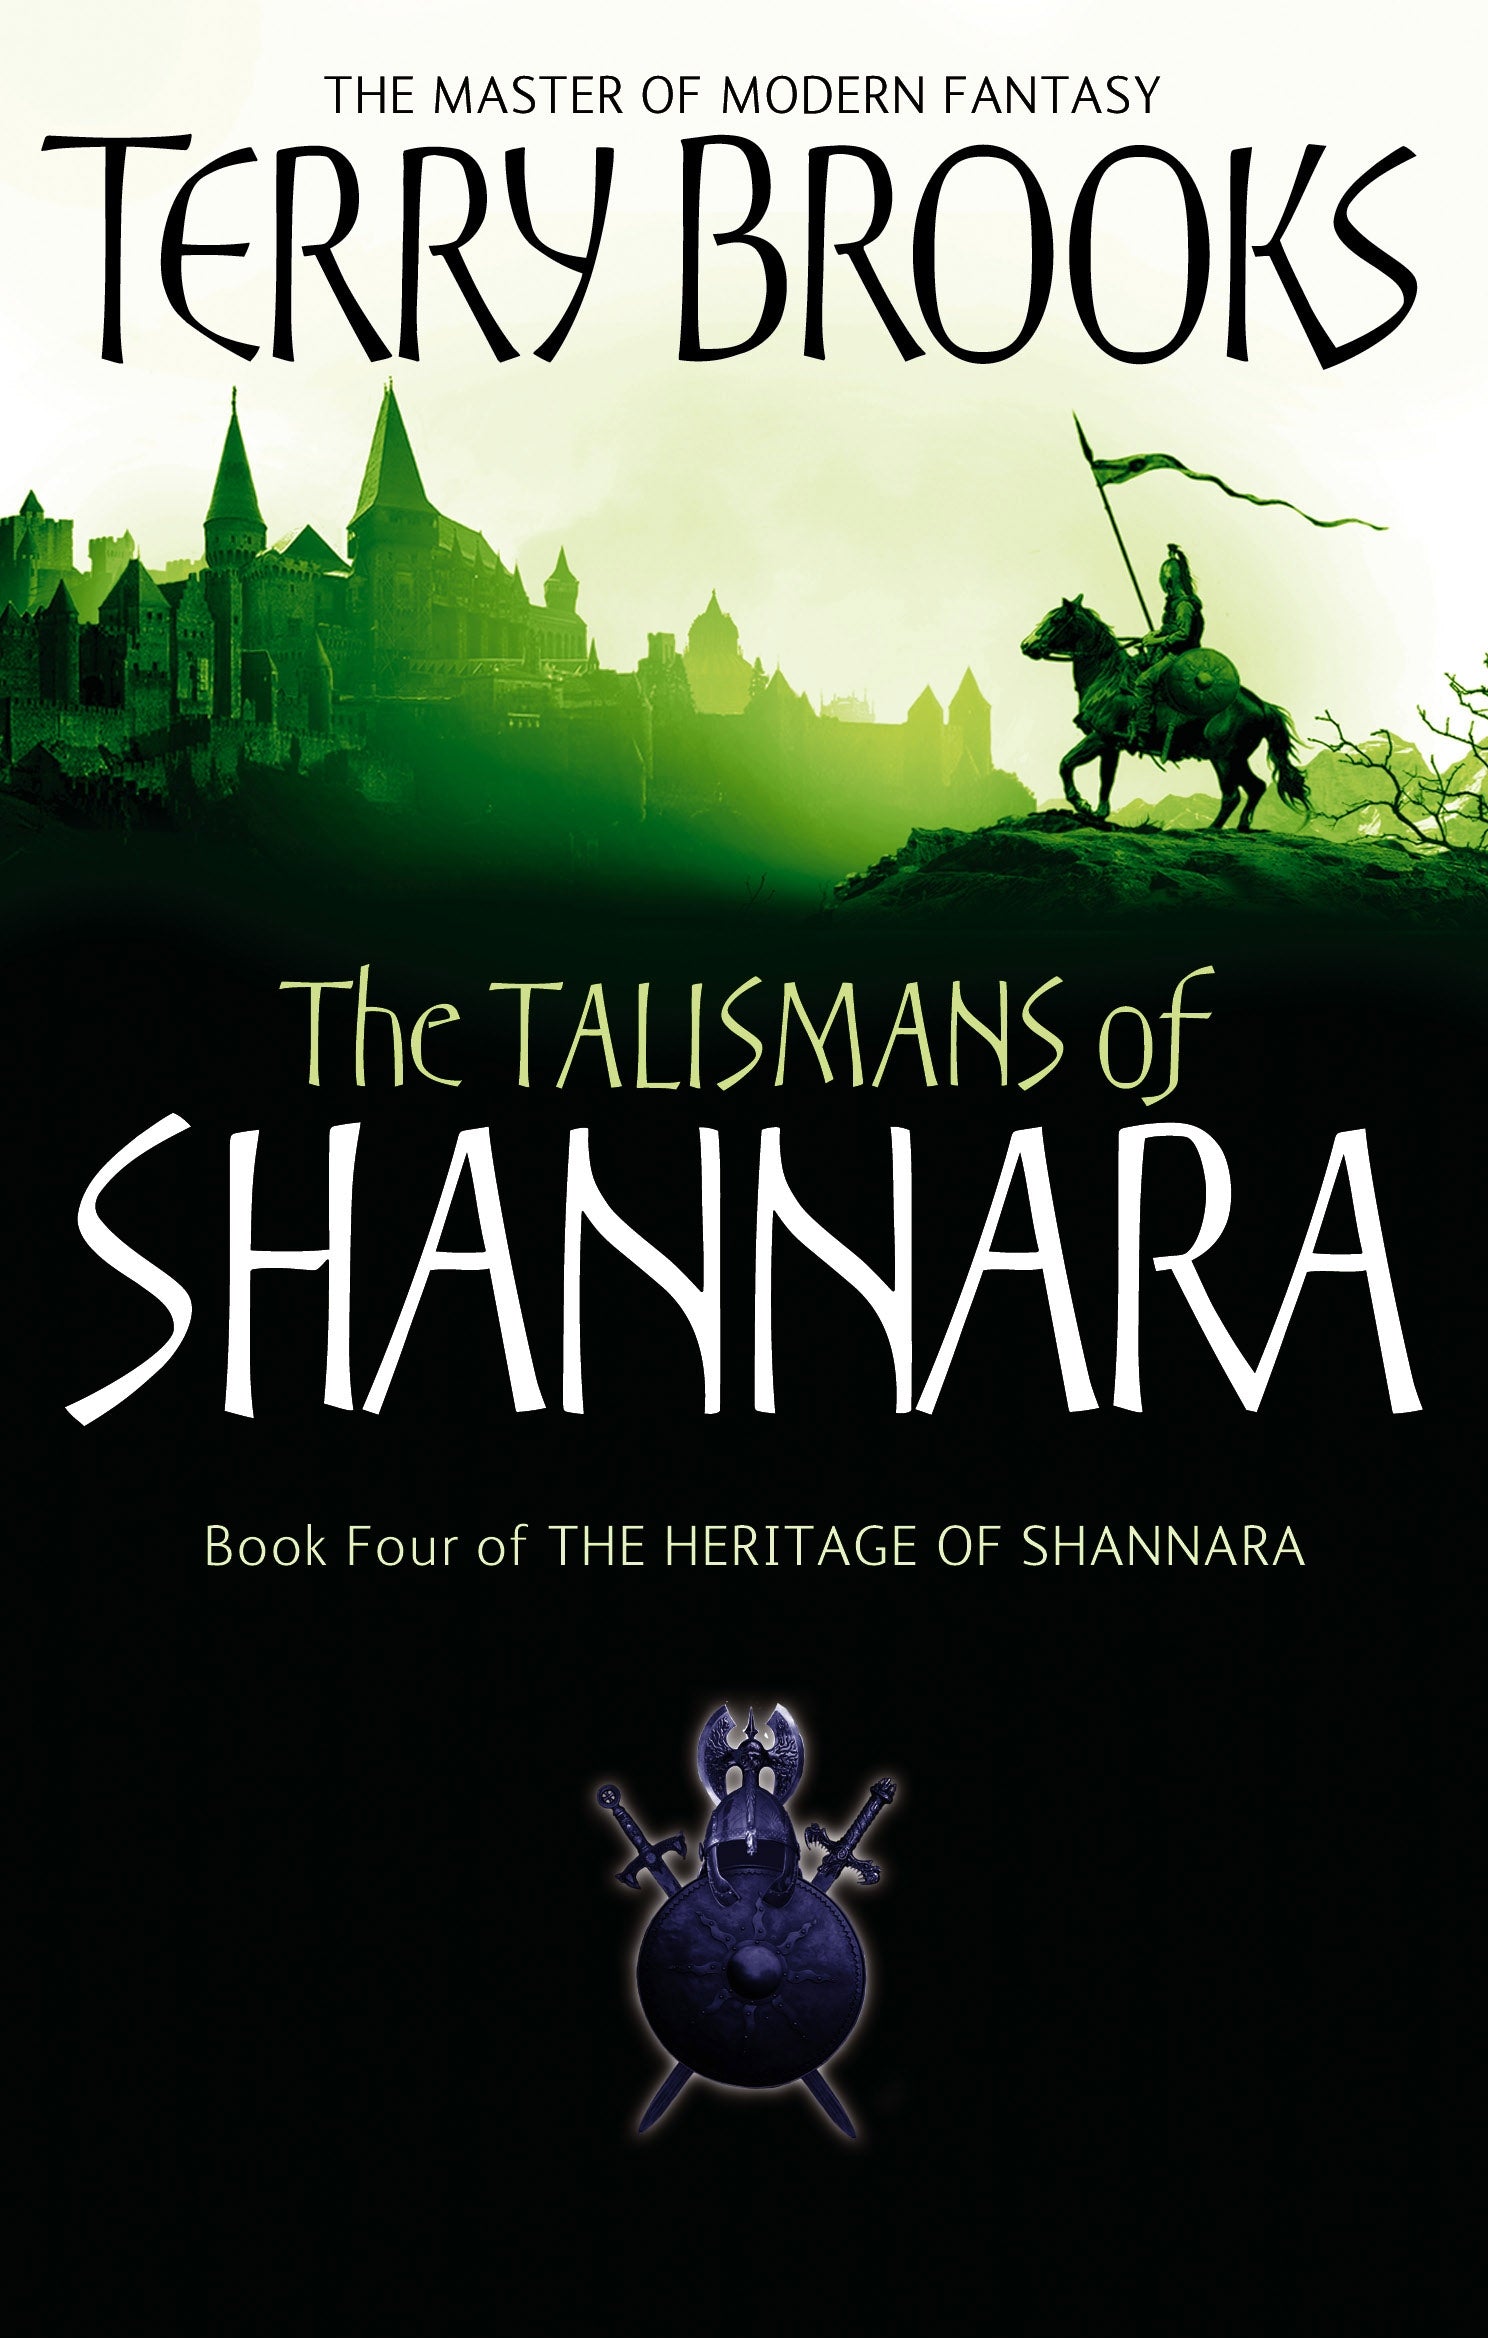 The Talismans Of Shannara by Terry Brooks